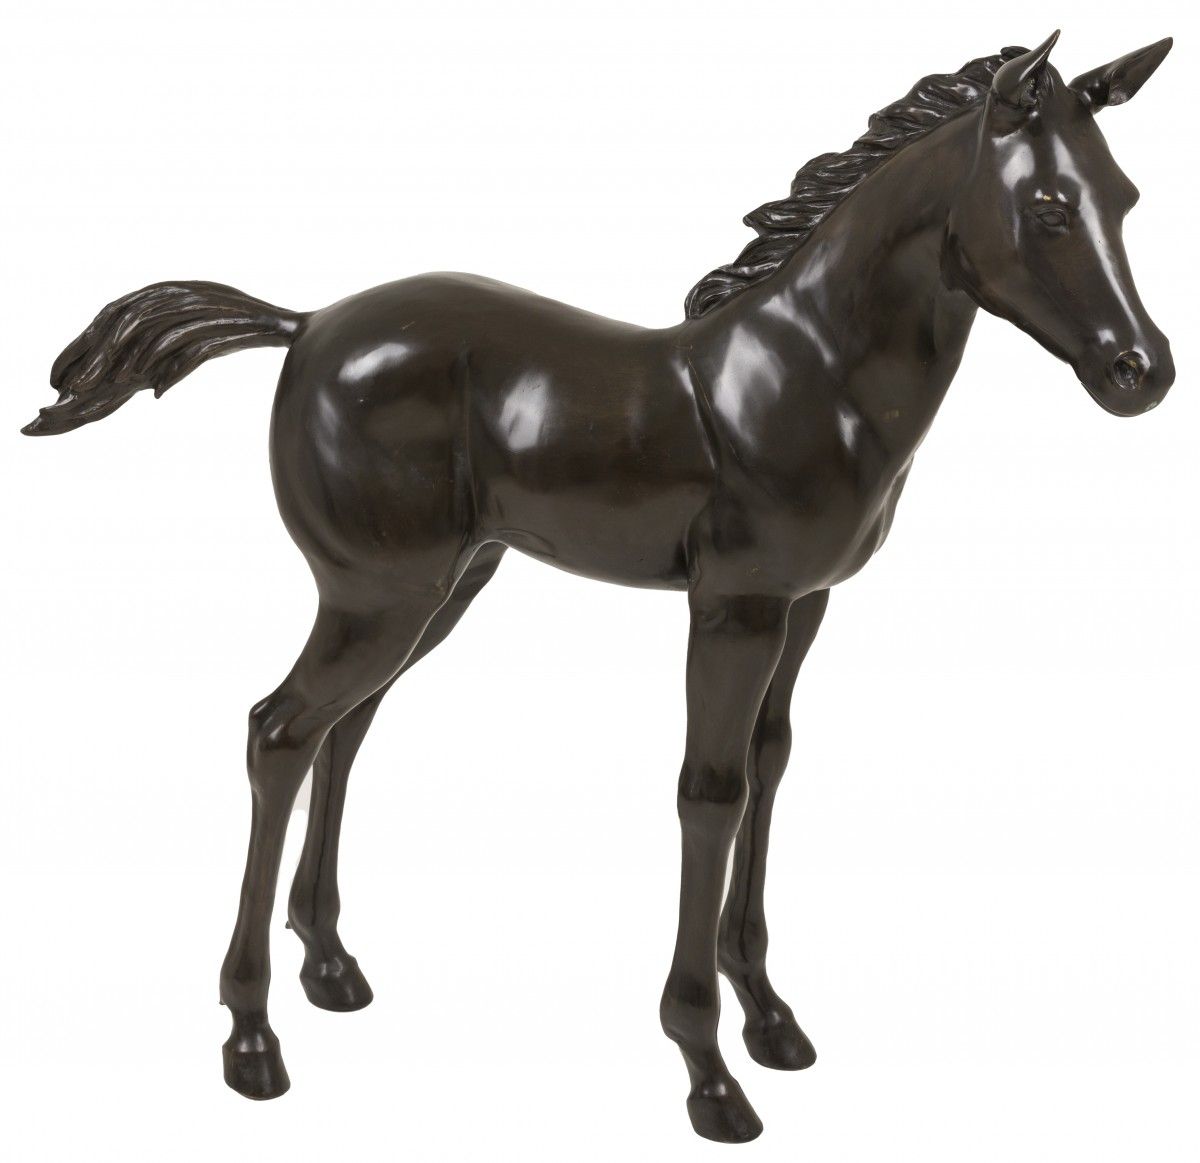 A bronze sculpture of a young foal / baby horse, Germany(?), 20th century. 已被拍过。